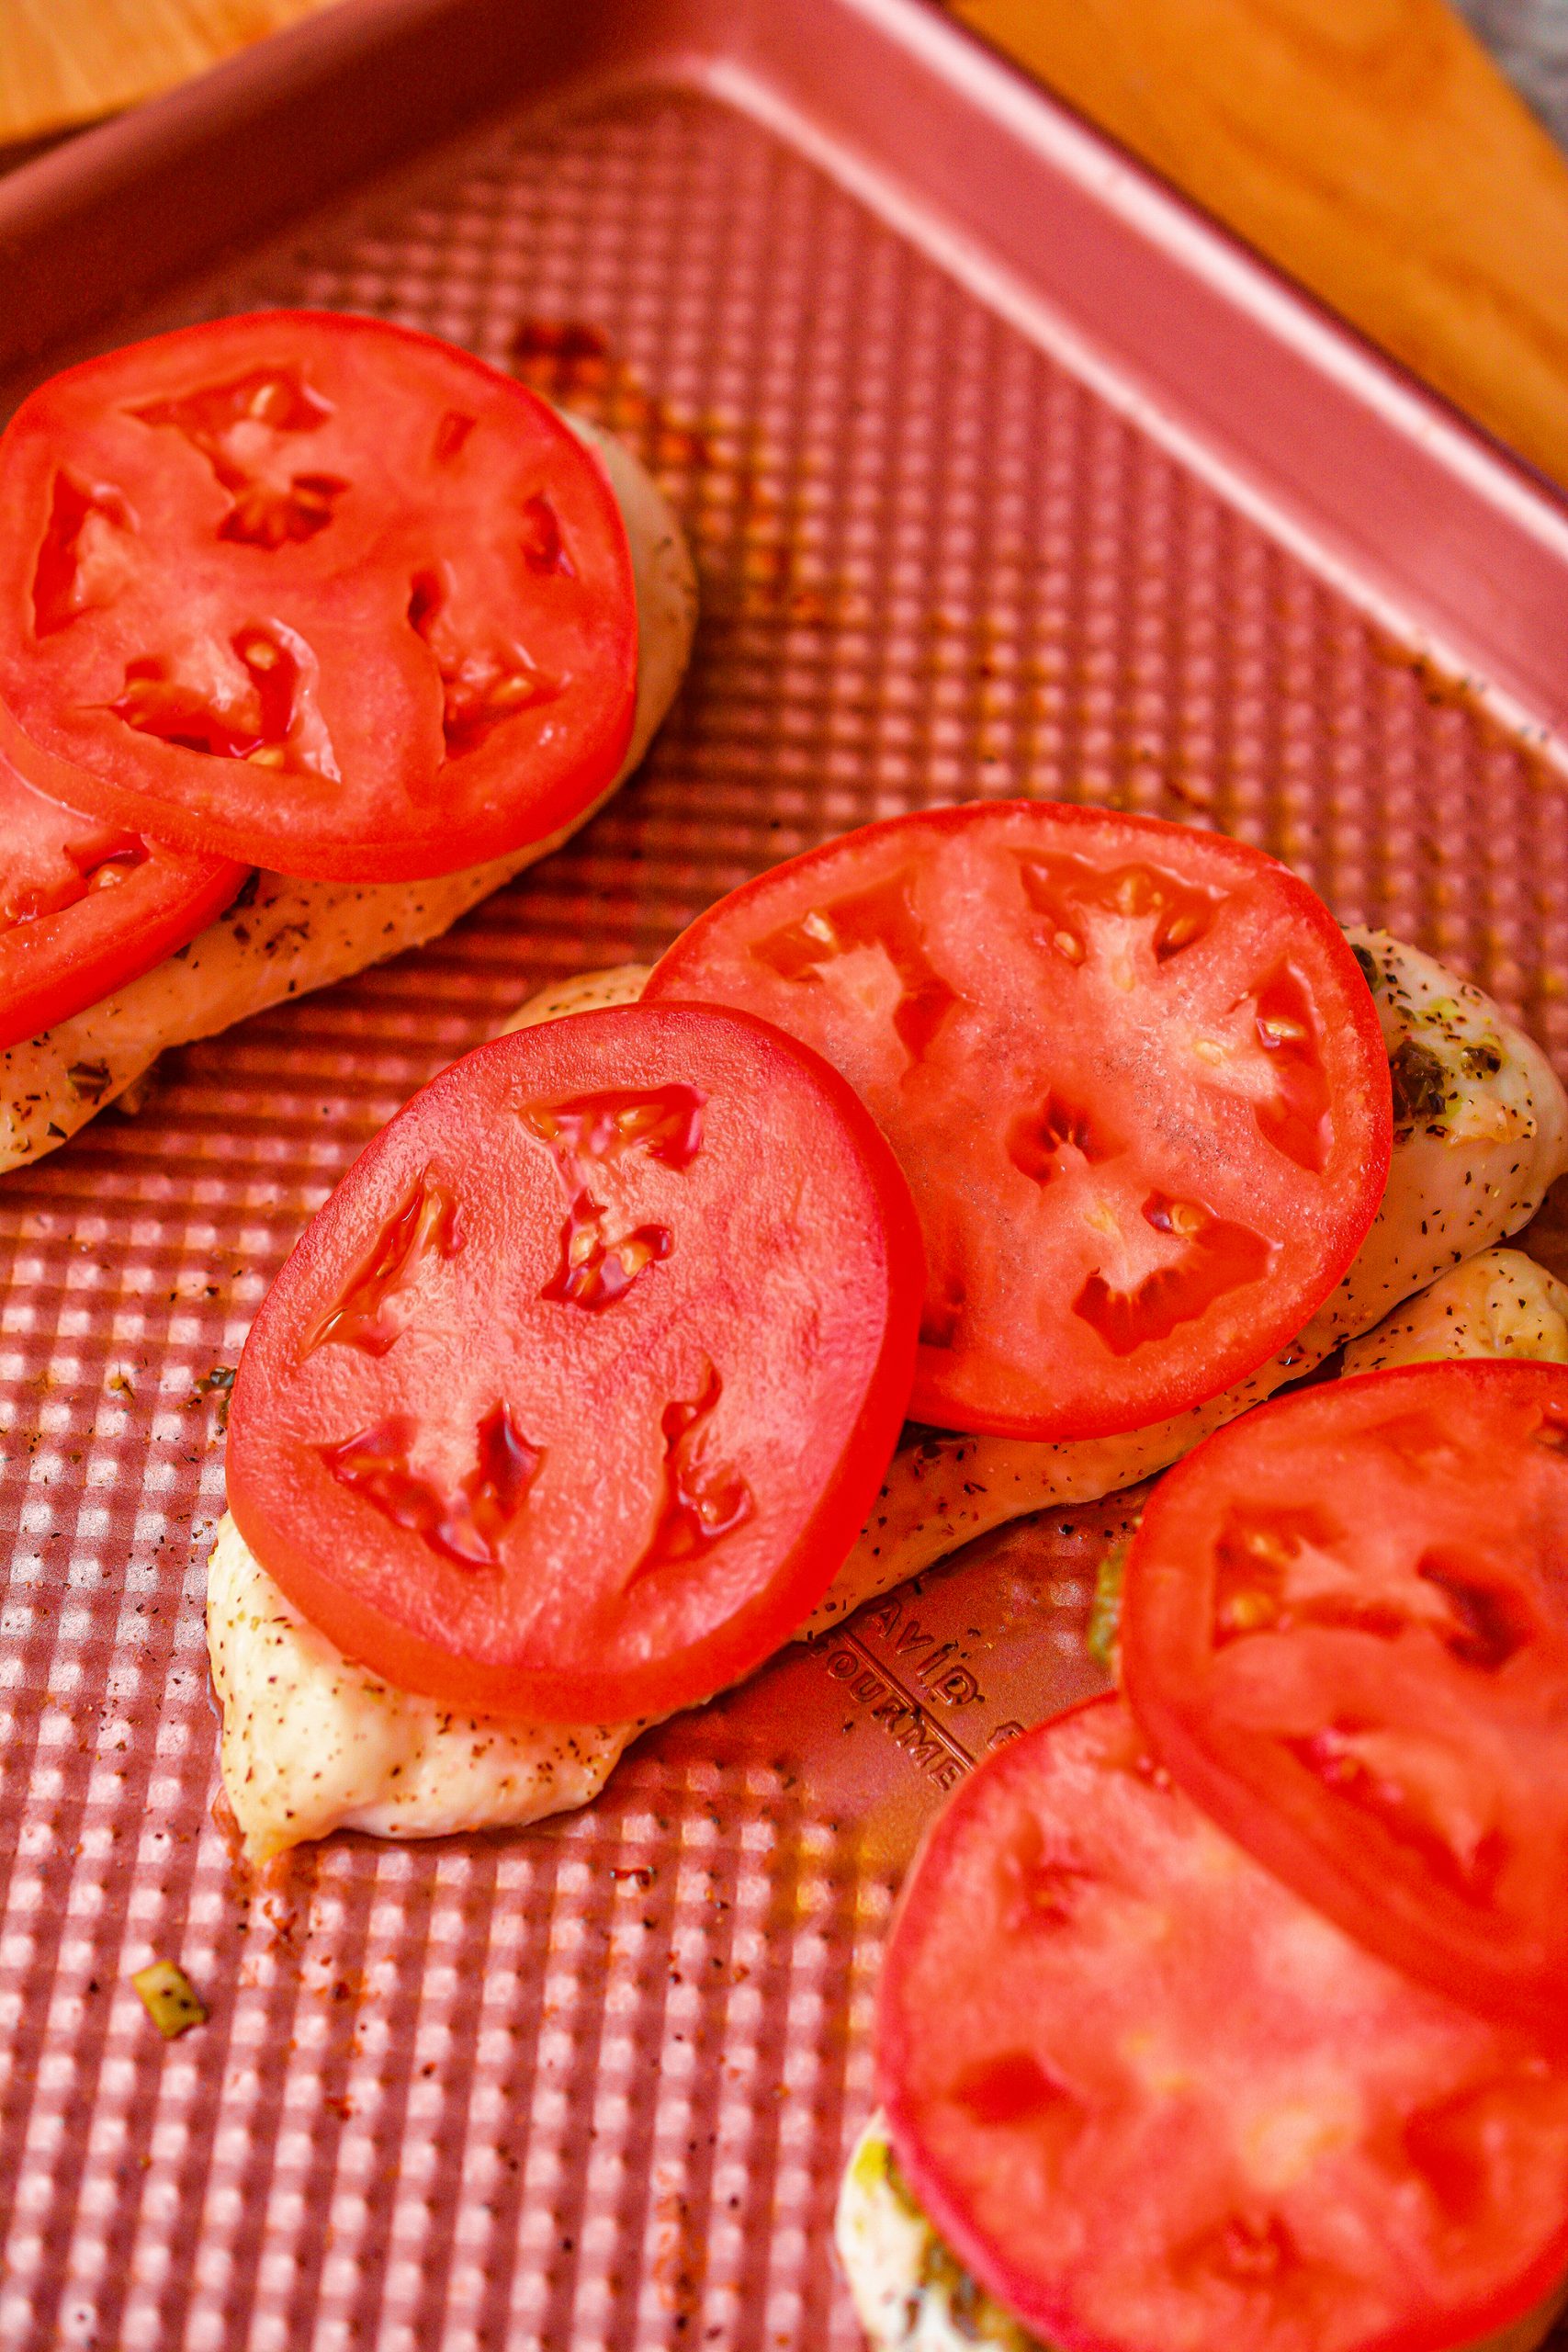 Top the chicken pieces with slices of tomato.